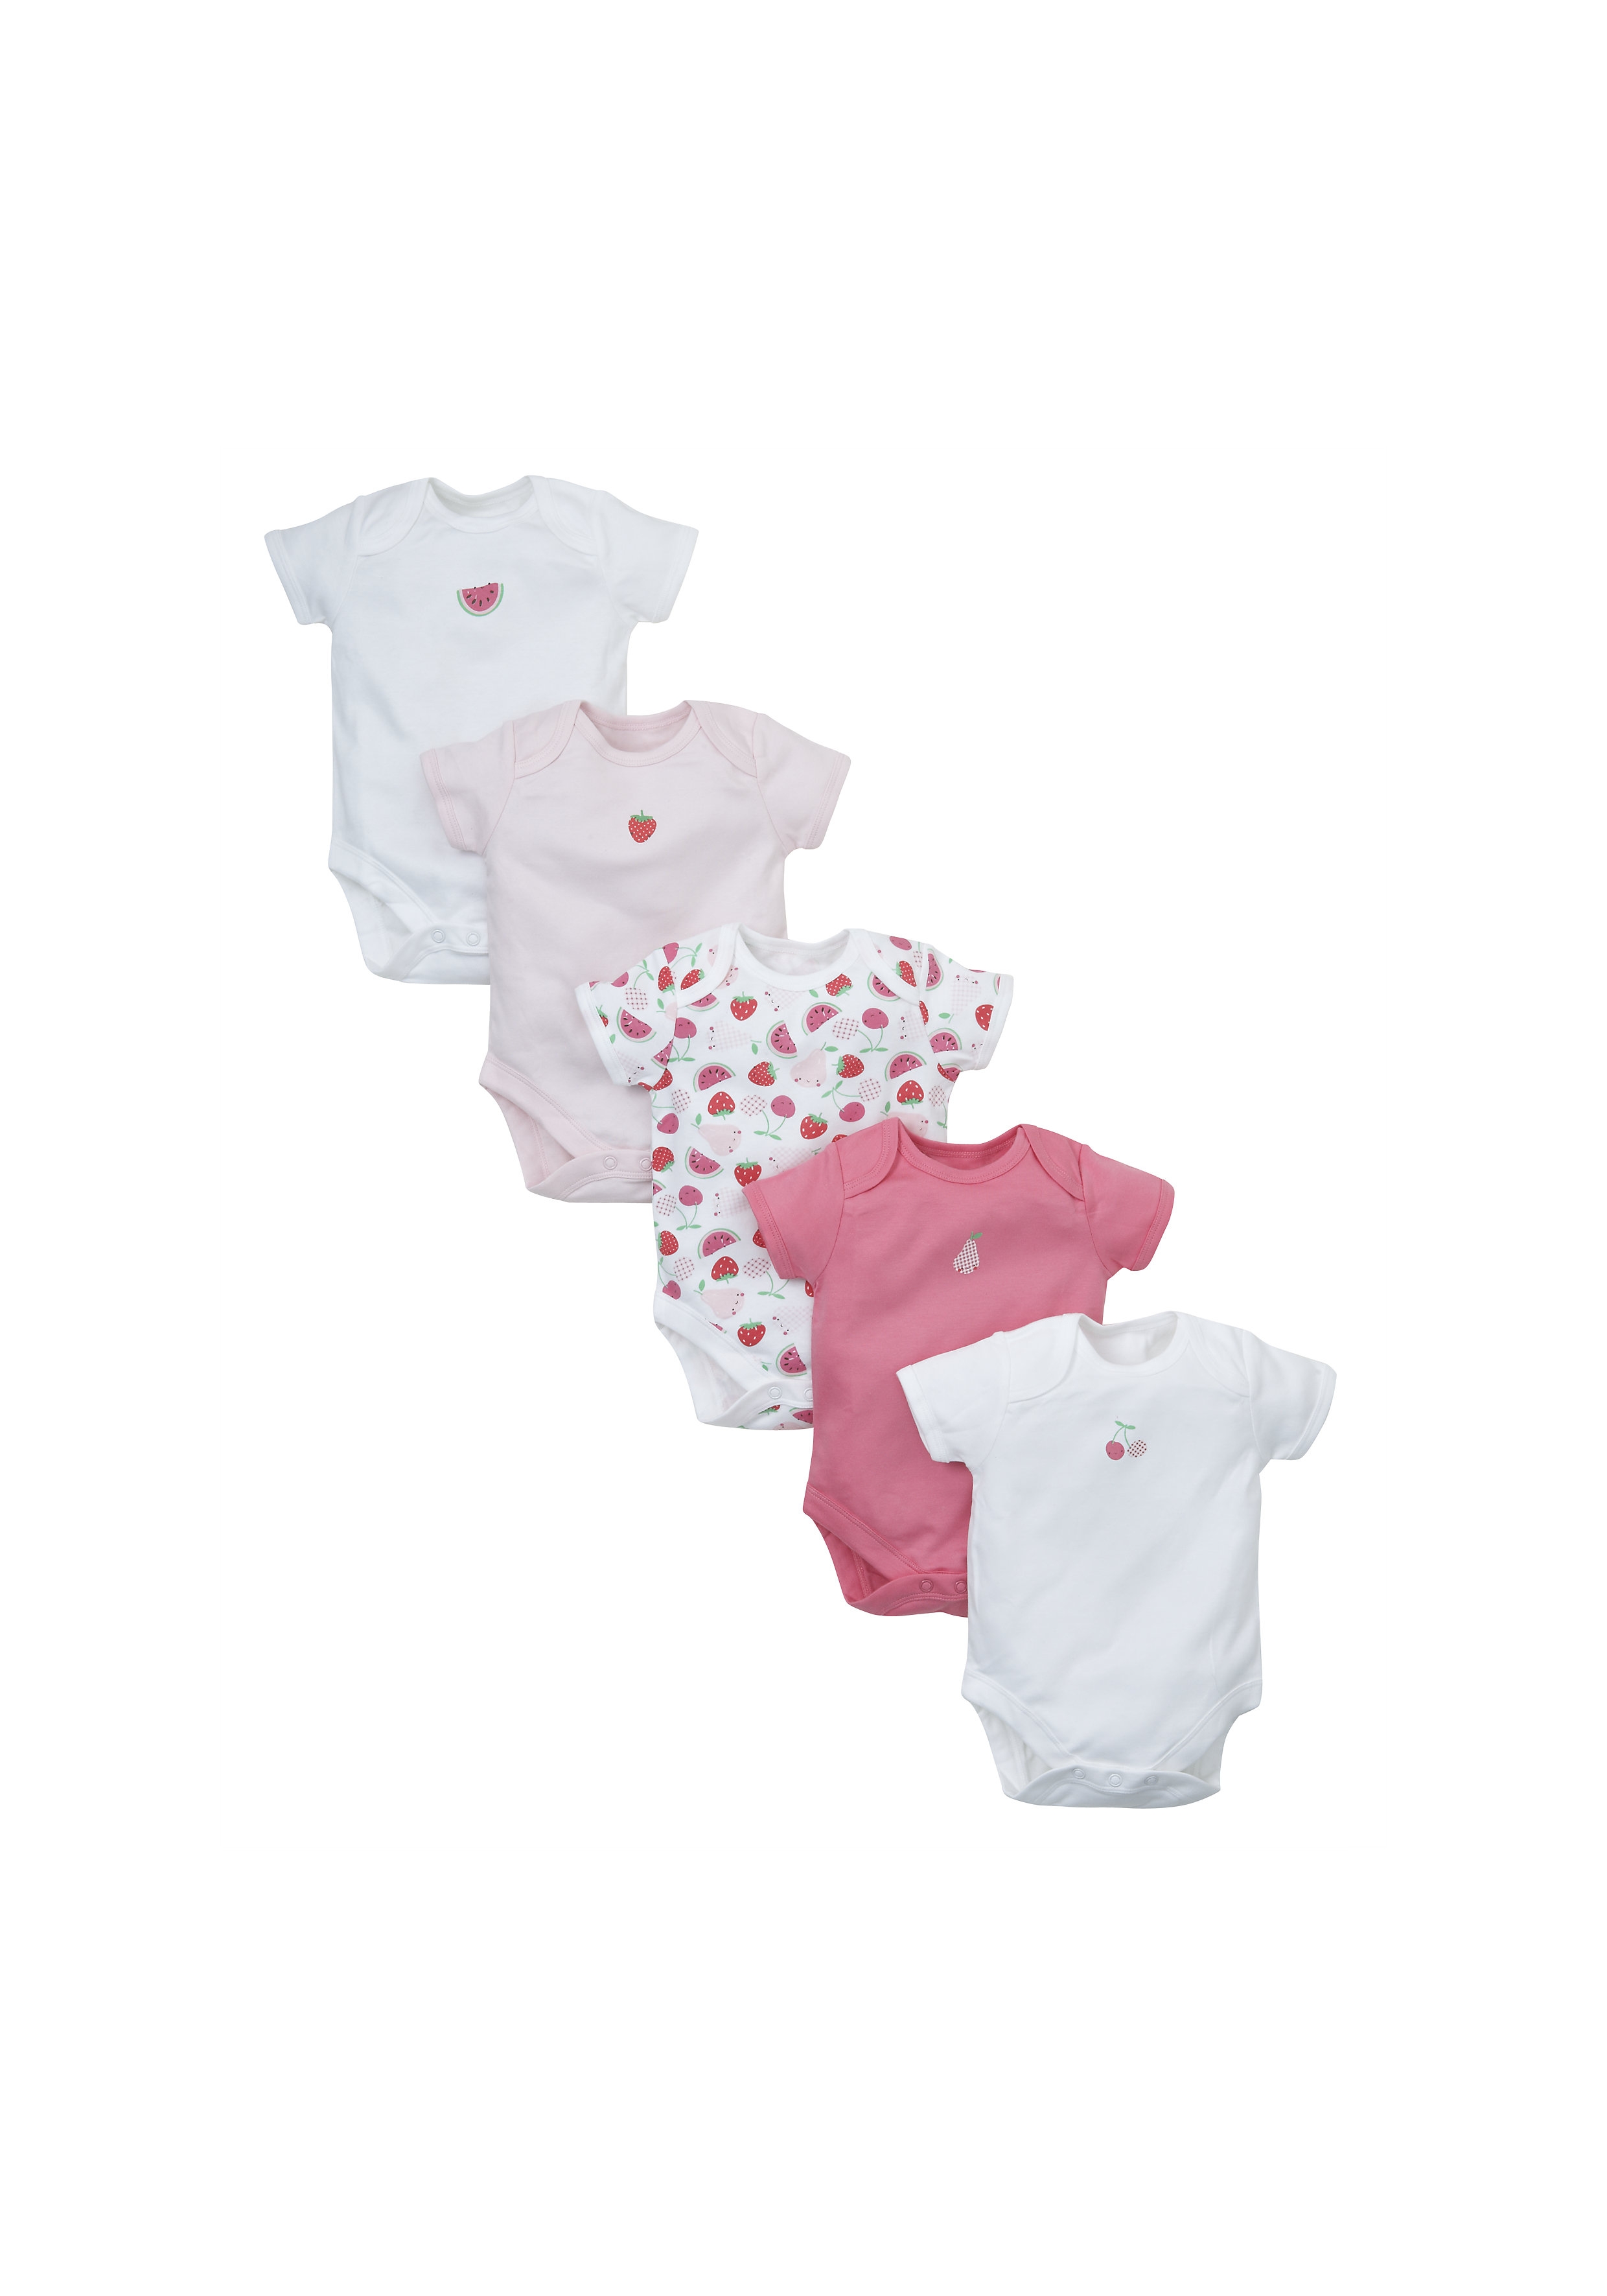 Mothercare | Girls Fruit Half Sleeve Bodysuits - Pack Of 5 - Multicolor